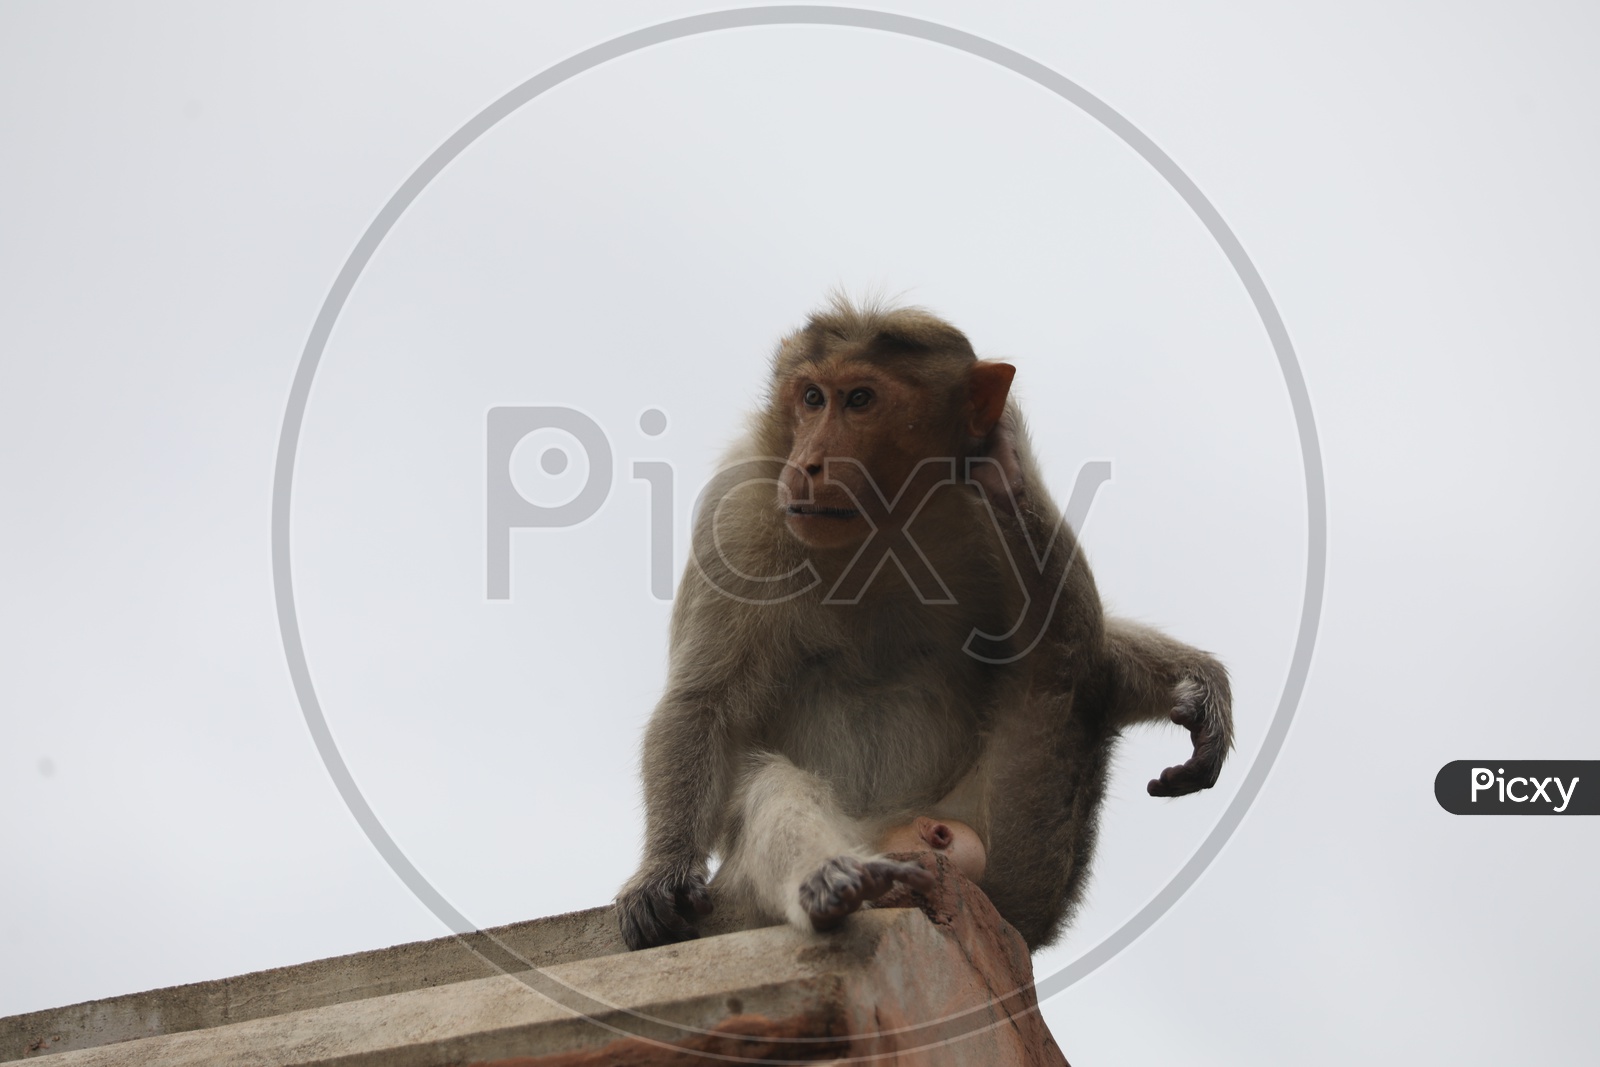 Monkey Or Indian Macauque on Hindu Temple Roofs